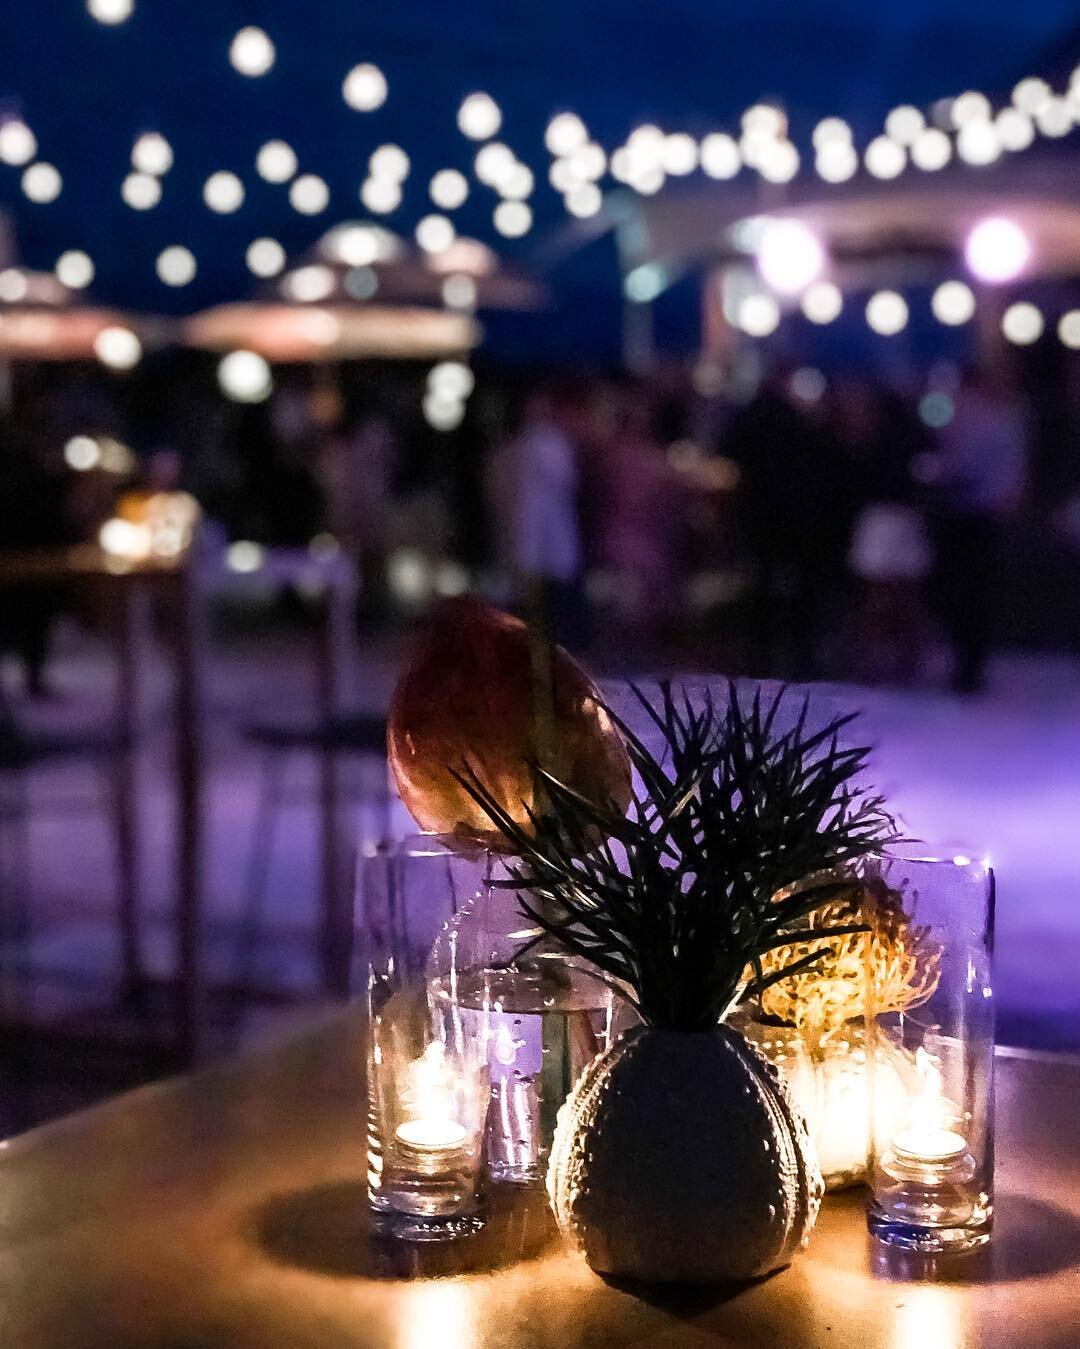 The perfect mood lighting for the autumn nights! 
Make your next event special and host it on your own private island paradise! 
Design + Production by @dasfete
Email: hawkins@thewaterfront.bm or call (441) 299-0700 for bookings and enquiries!

Event